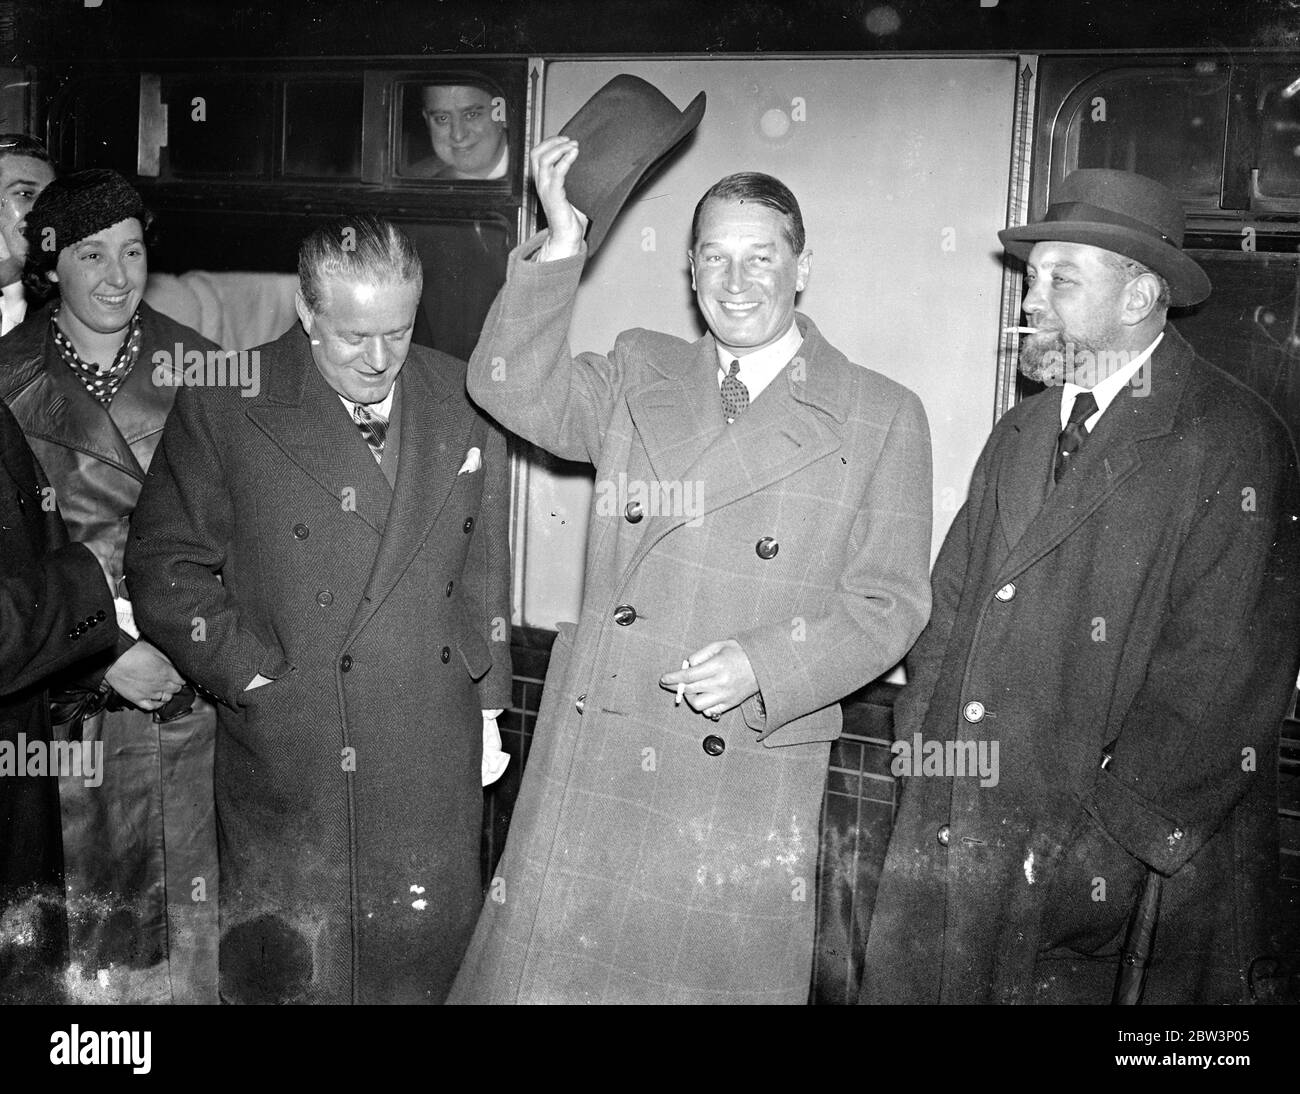 Maurice Chevalier arrives in London to make British film . Maurice Chevalier the famous French Stage and film actor , arrived at Victoria Station from Paris . He is to commence work on his British film ' The beloved Vagabond at the Ealing Studios next week . Photo shows , Maurice Chevalier photographed on arrival at Victoria Station . 27 December 1935 Stock Photo